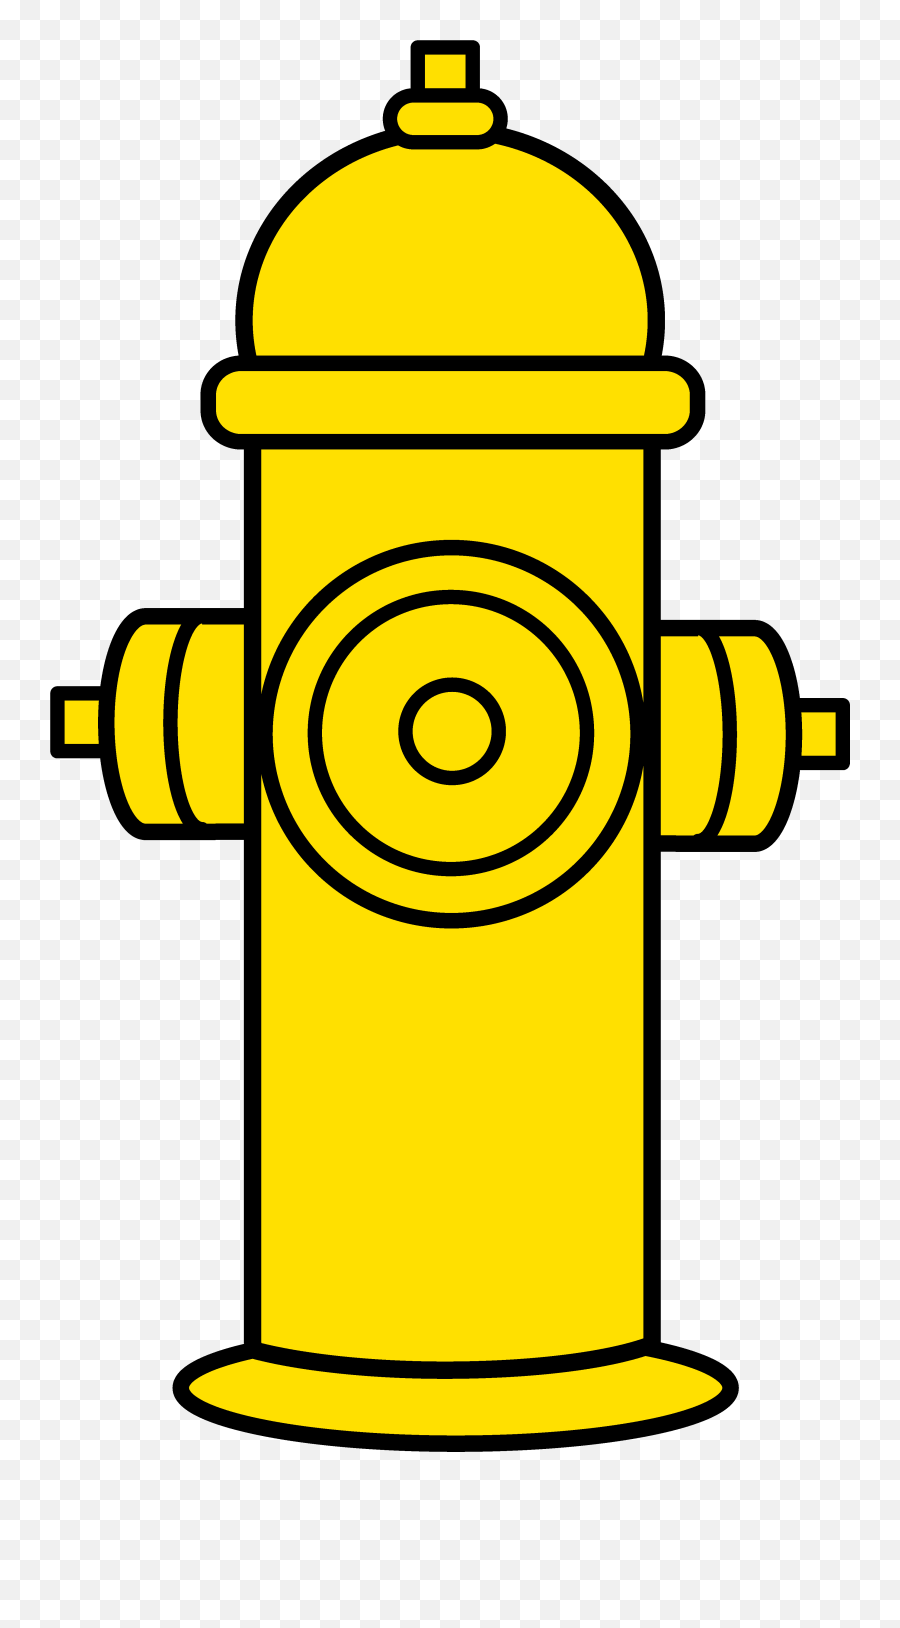 Fire Hydrant Clipart Free - Yellow Fire Hydrant Clipart Emoji,Fire Hydreant Emoji